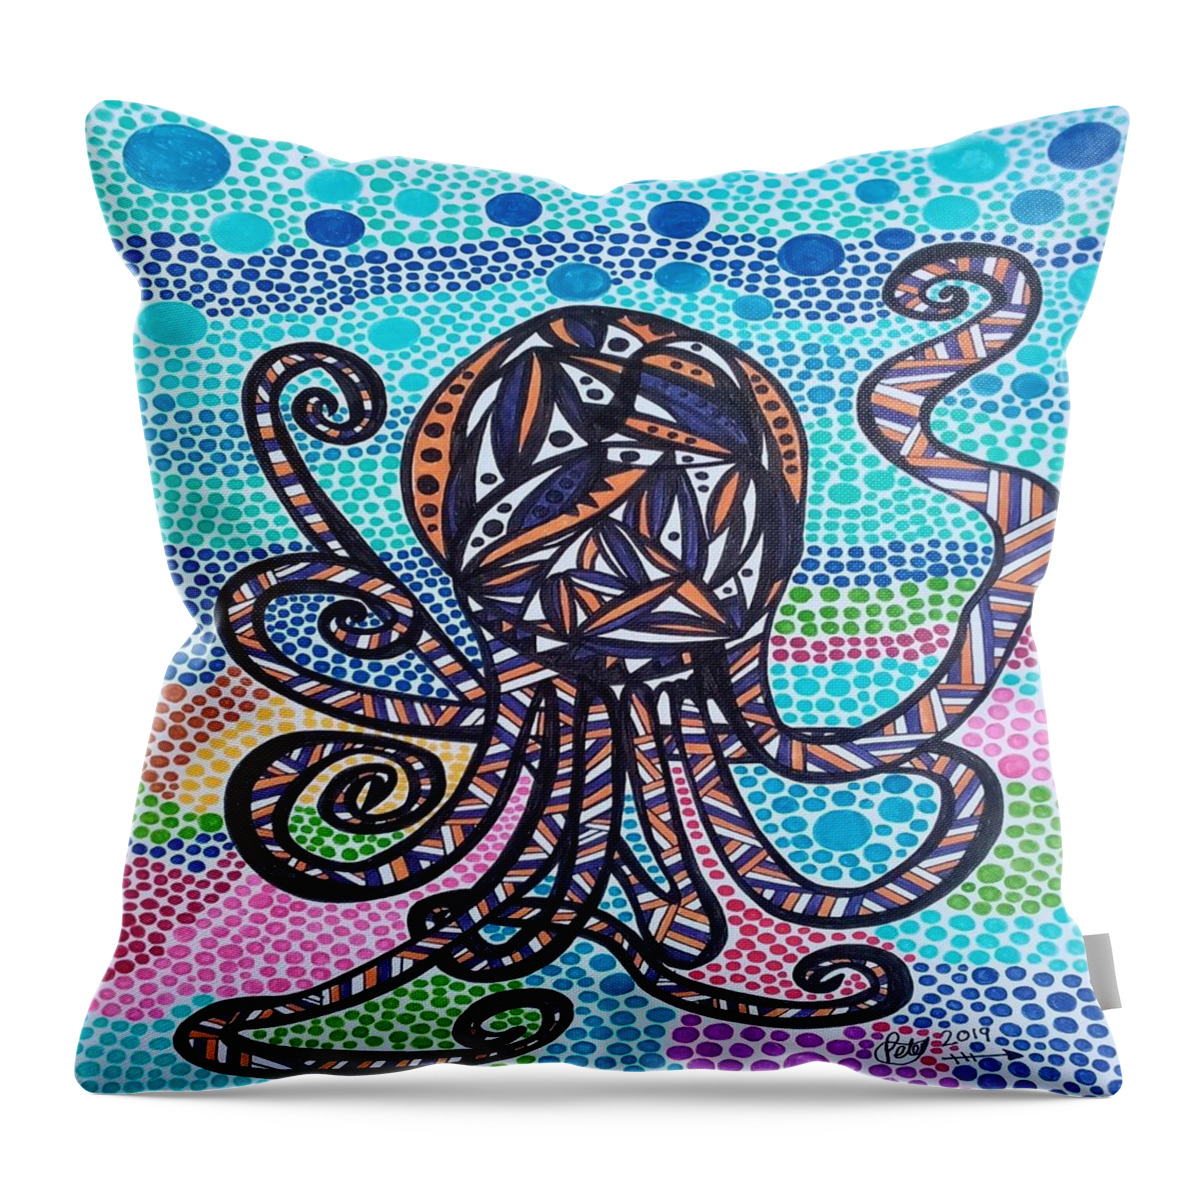 Octa Throw Pillow featuring the drawing Octa by Peter Johnstone